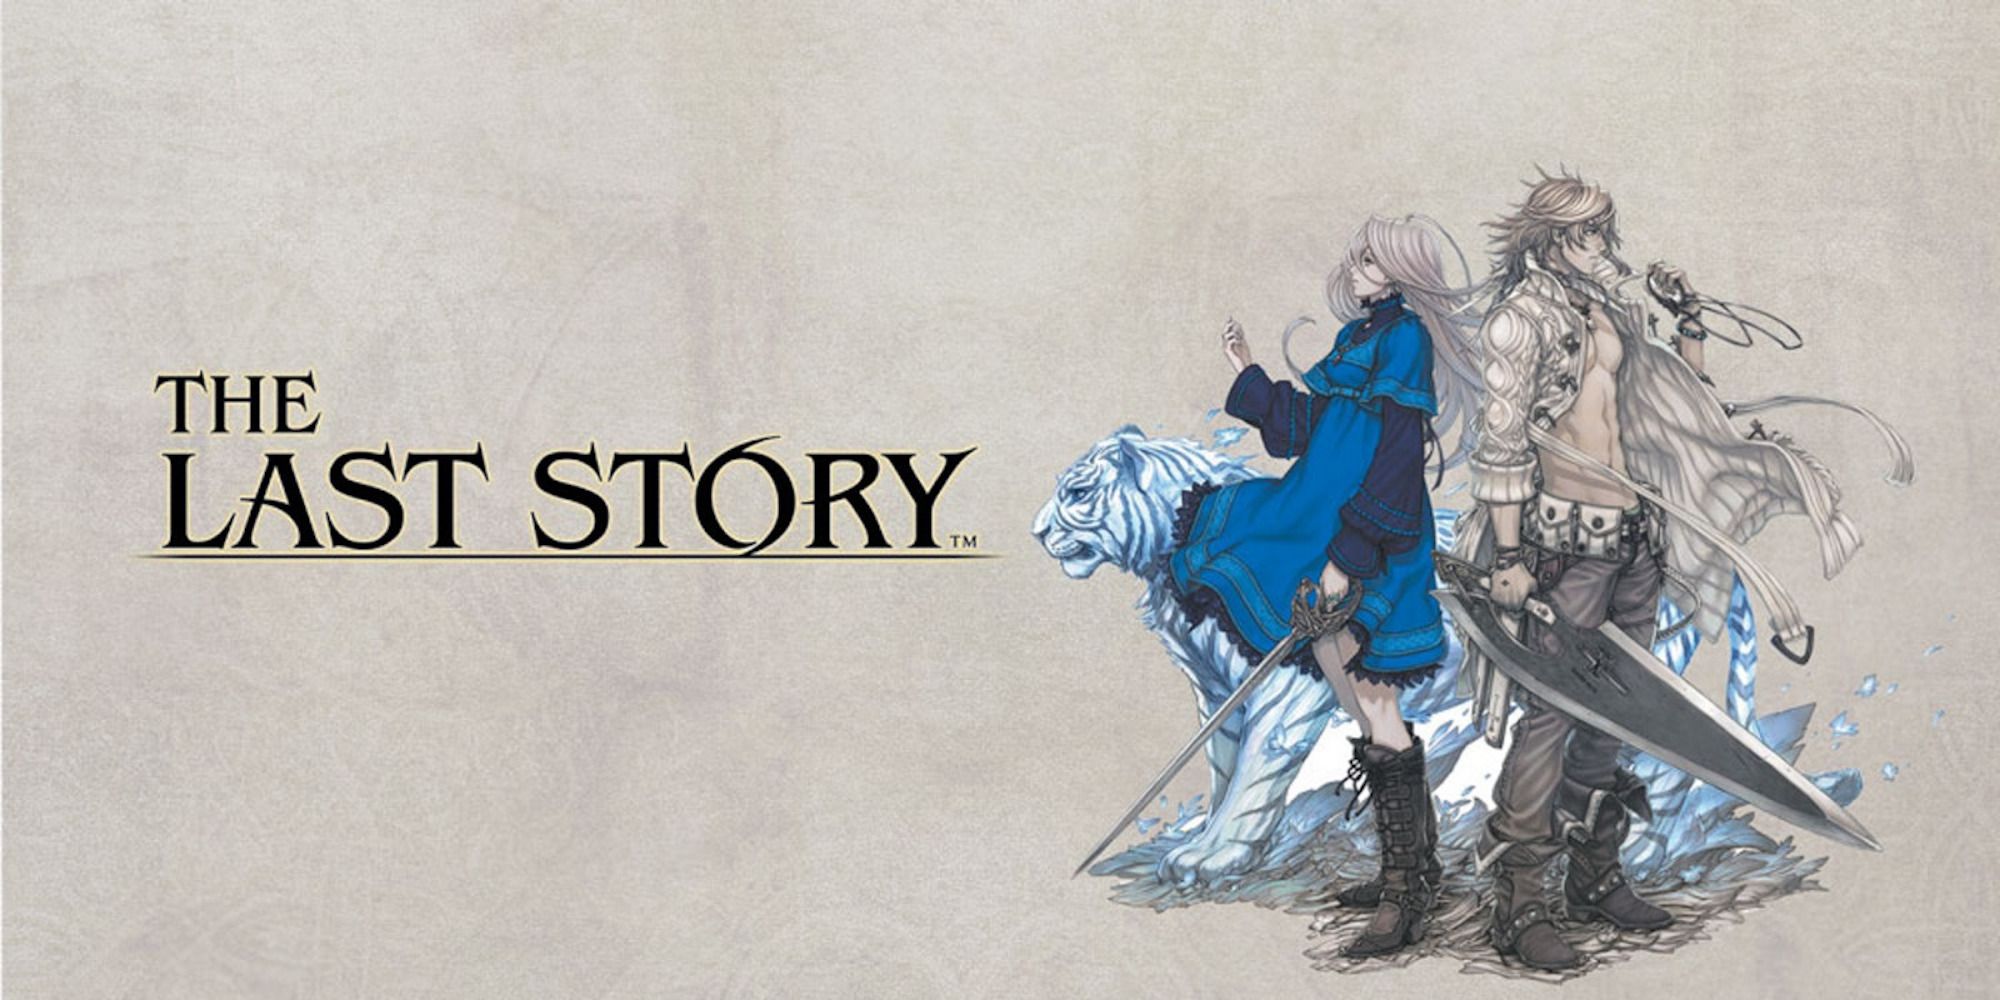 Promo art featuring characters in The Last Story